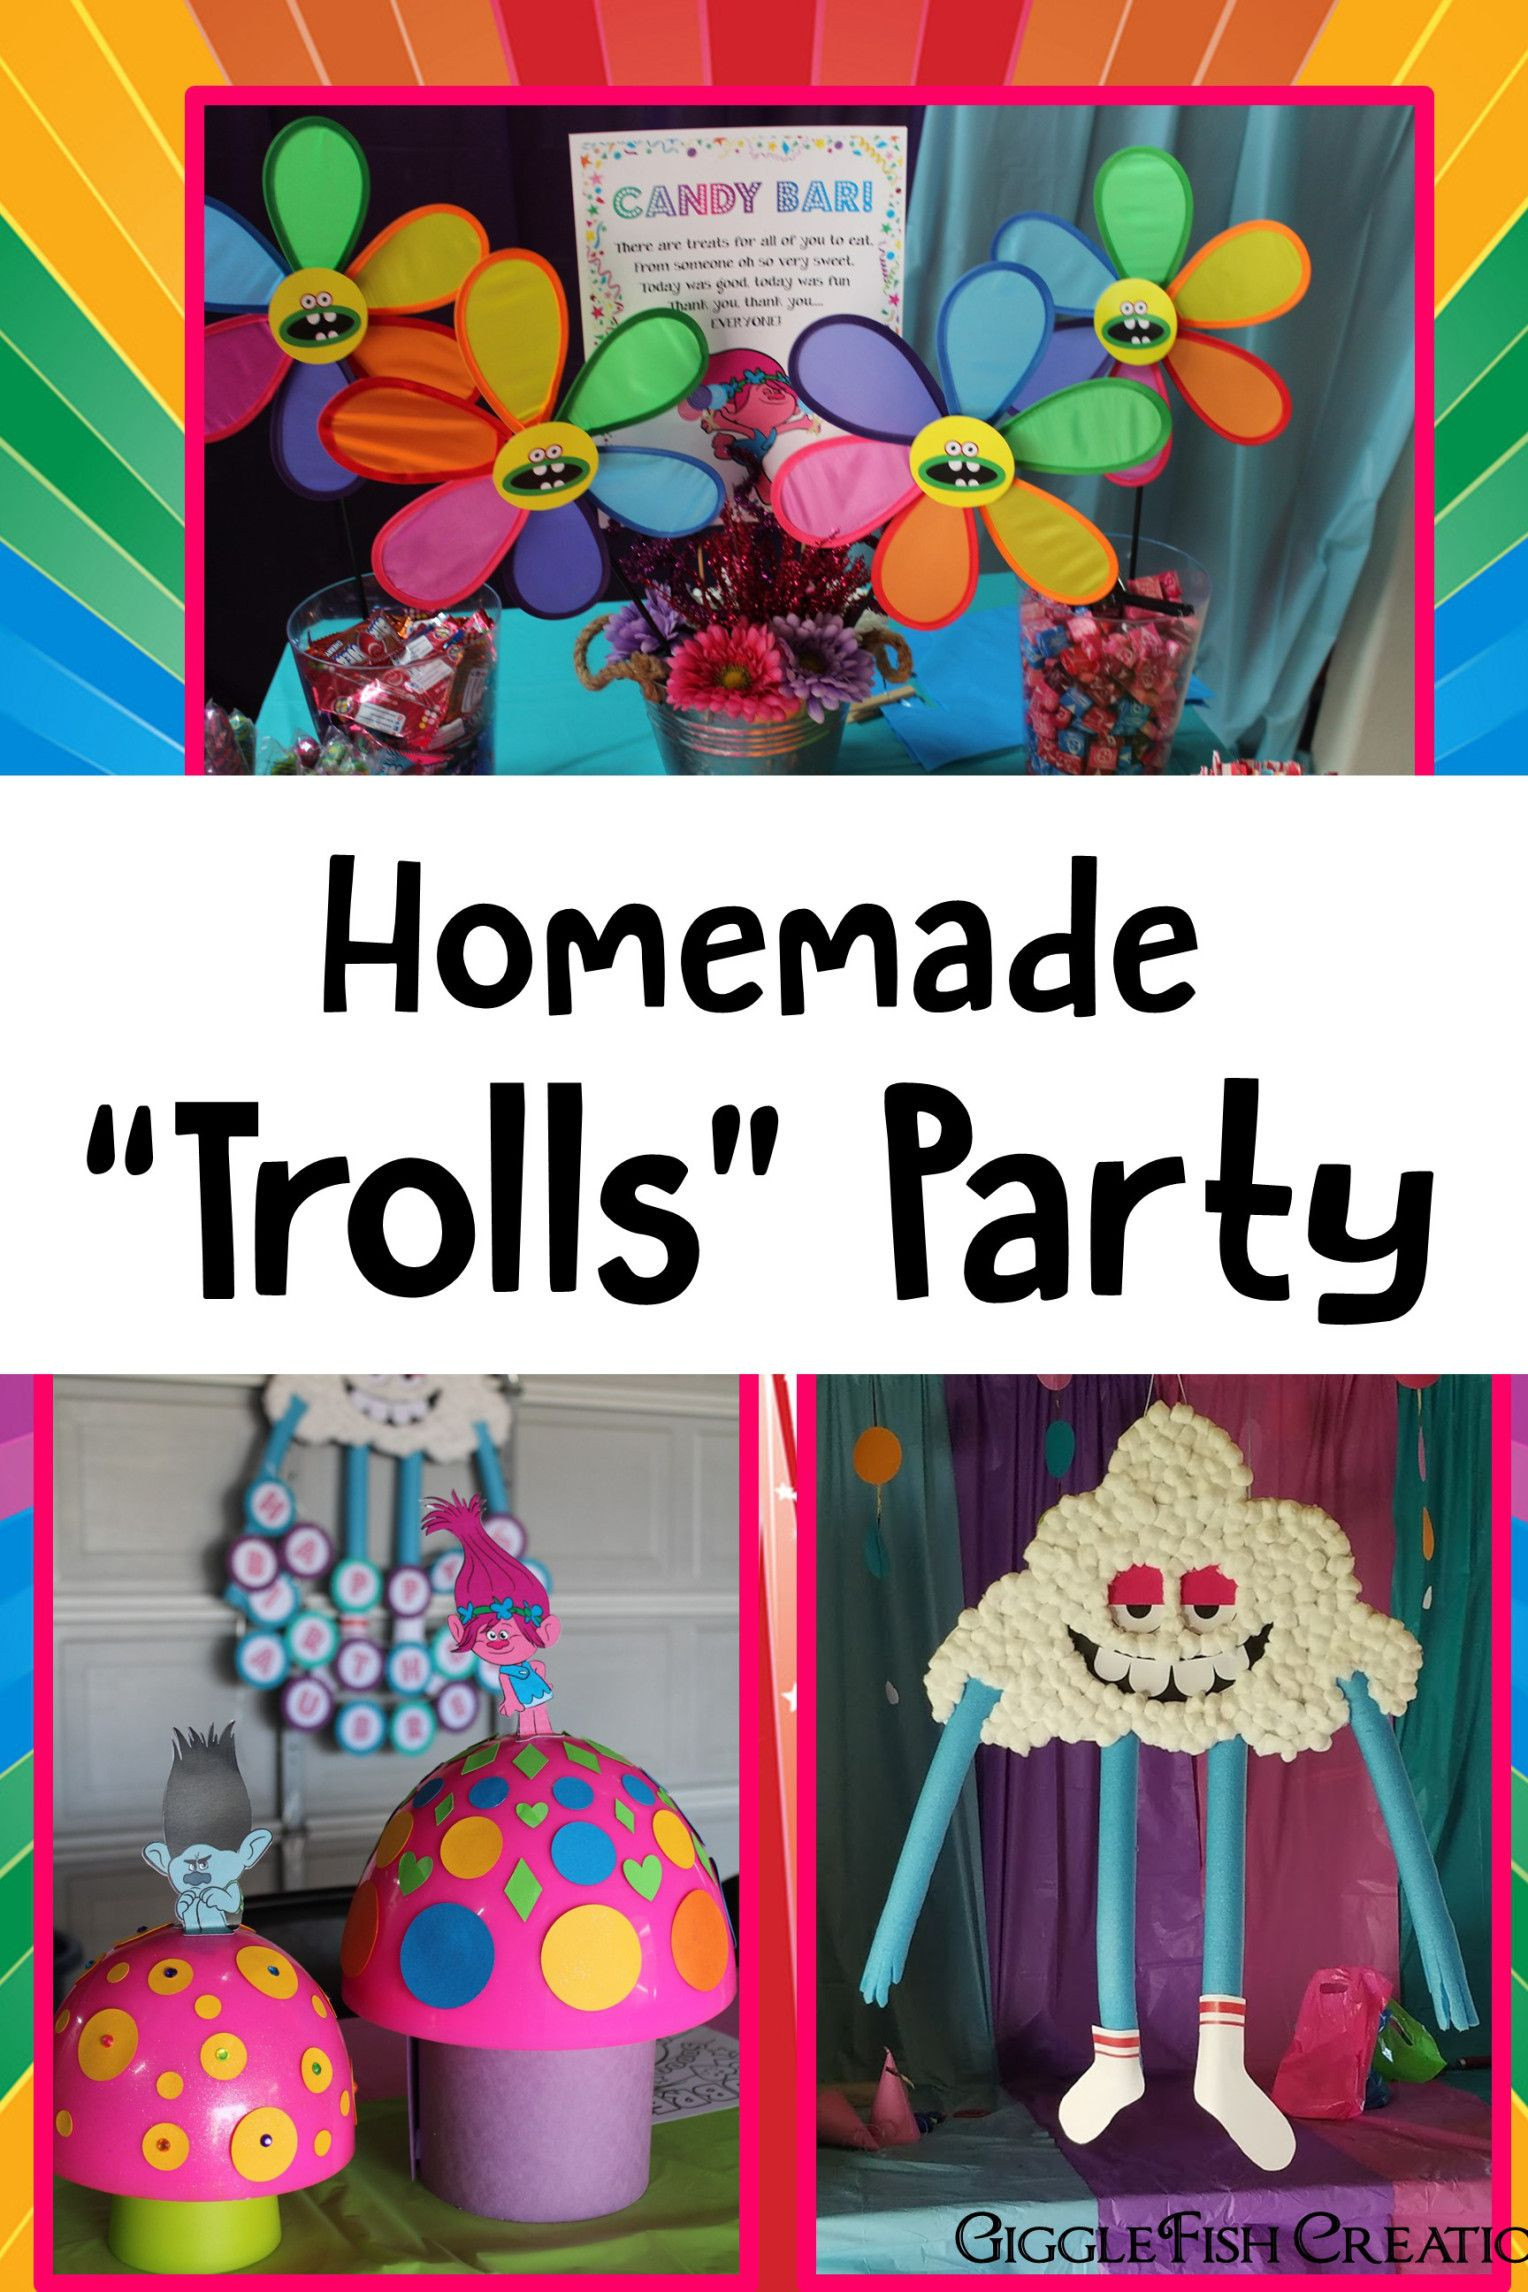 Trolls Party Ideas Diy
 Pin on Candy Shop Party